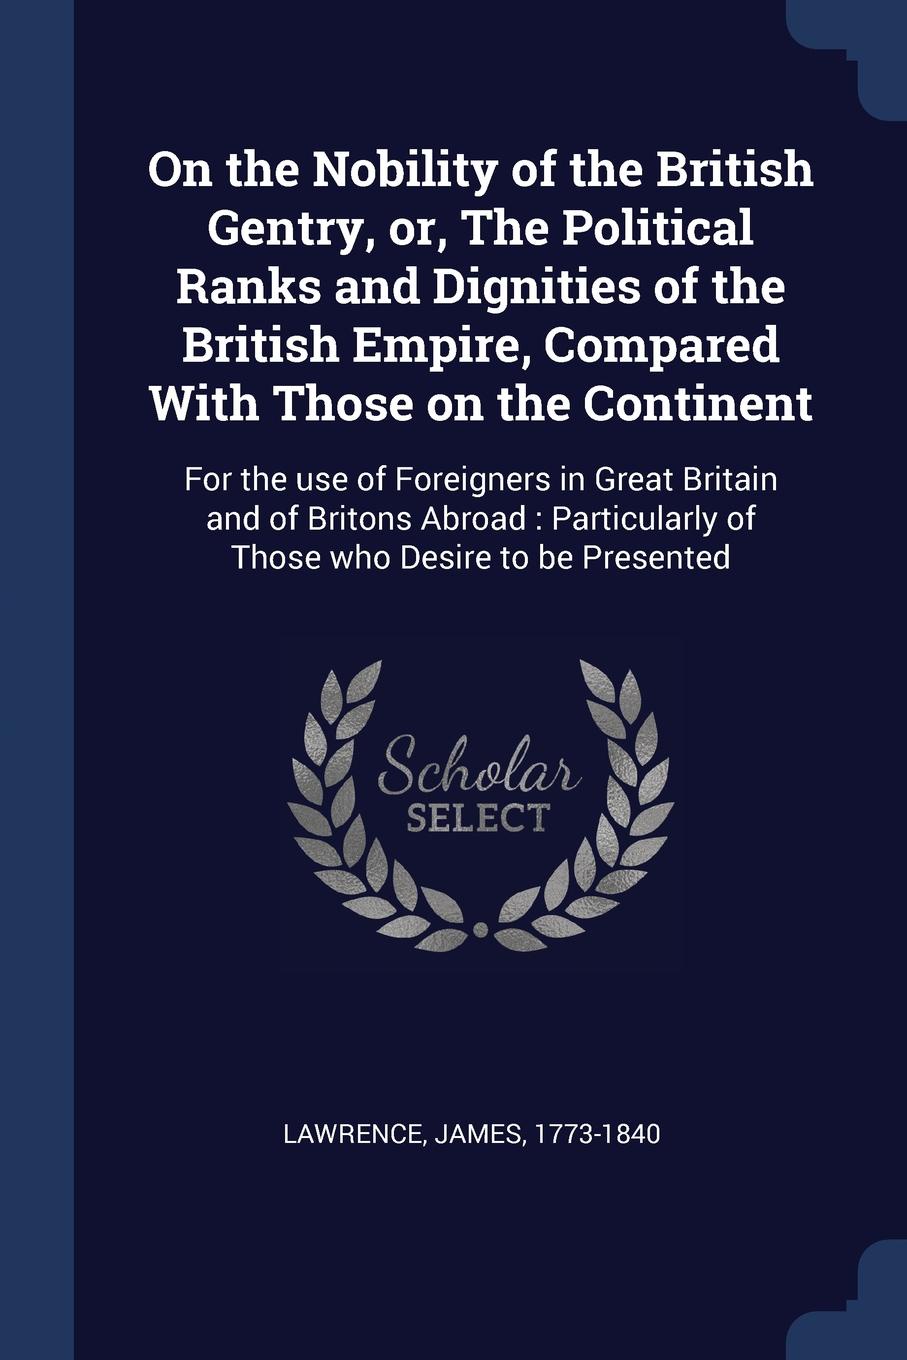 On the Nobility of the British Gentry, or, The Political Ranks and Dignities of the British Empire, Compared With Those on the Continent. For the use of Foreigners in Great Britain and of Britons Abroad : Particularly of Those who Desire to be Pre...